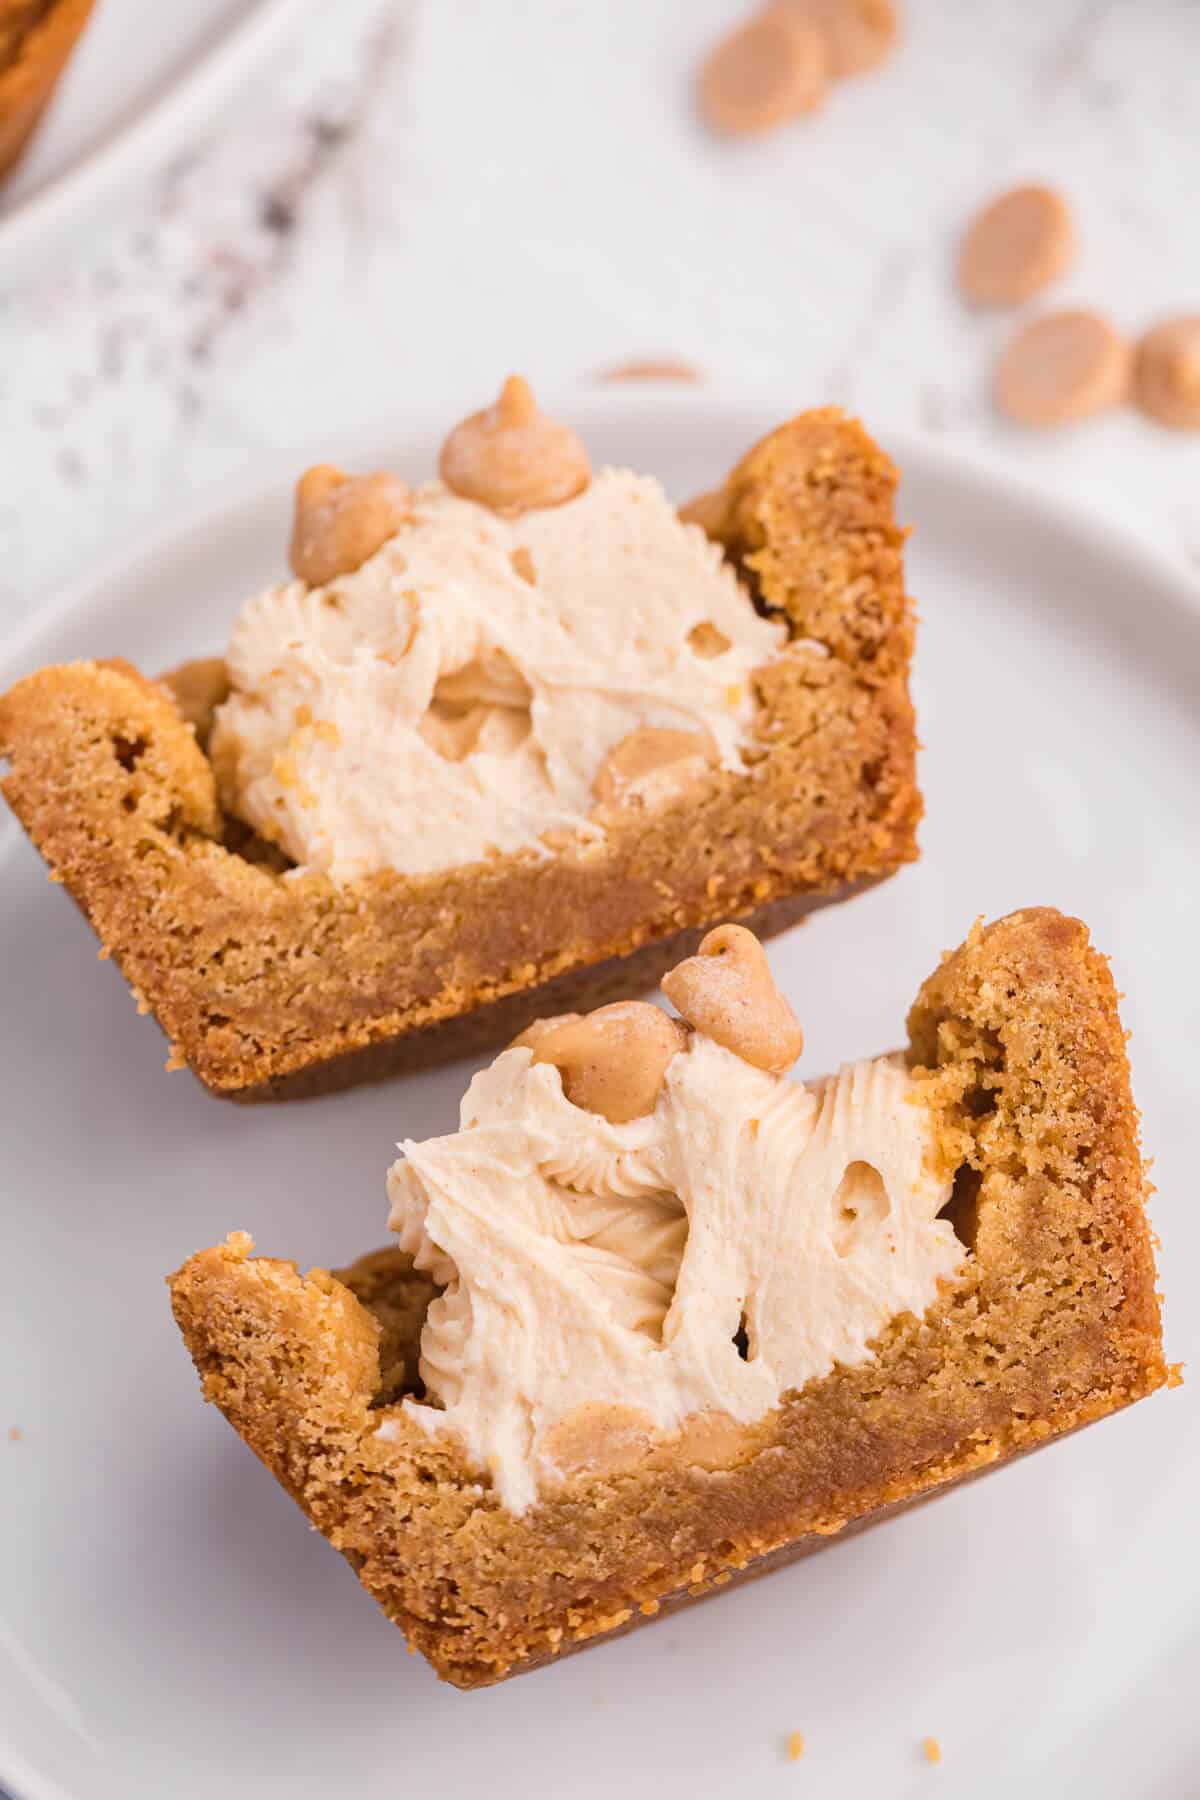 A peanut butter cookie cup cut in half on a plate.